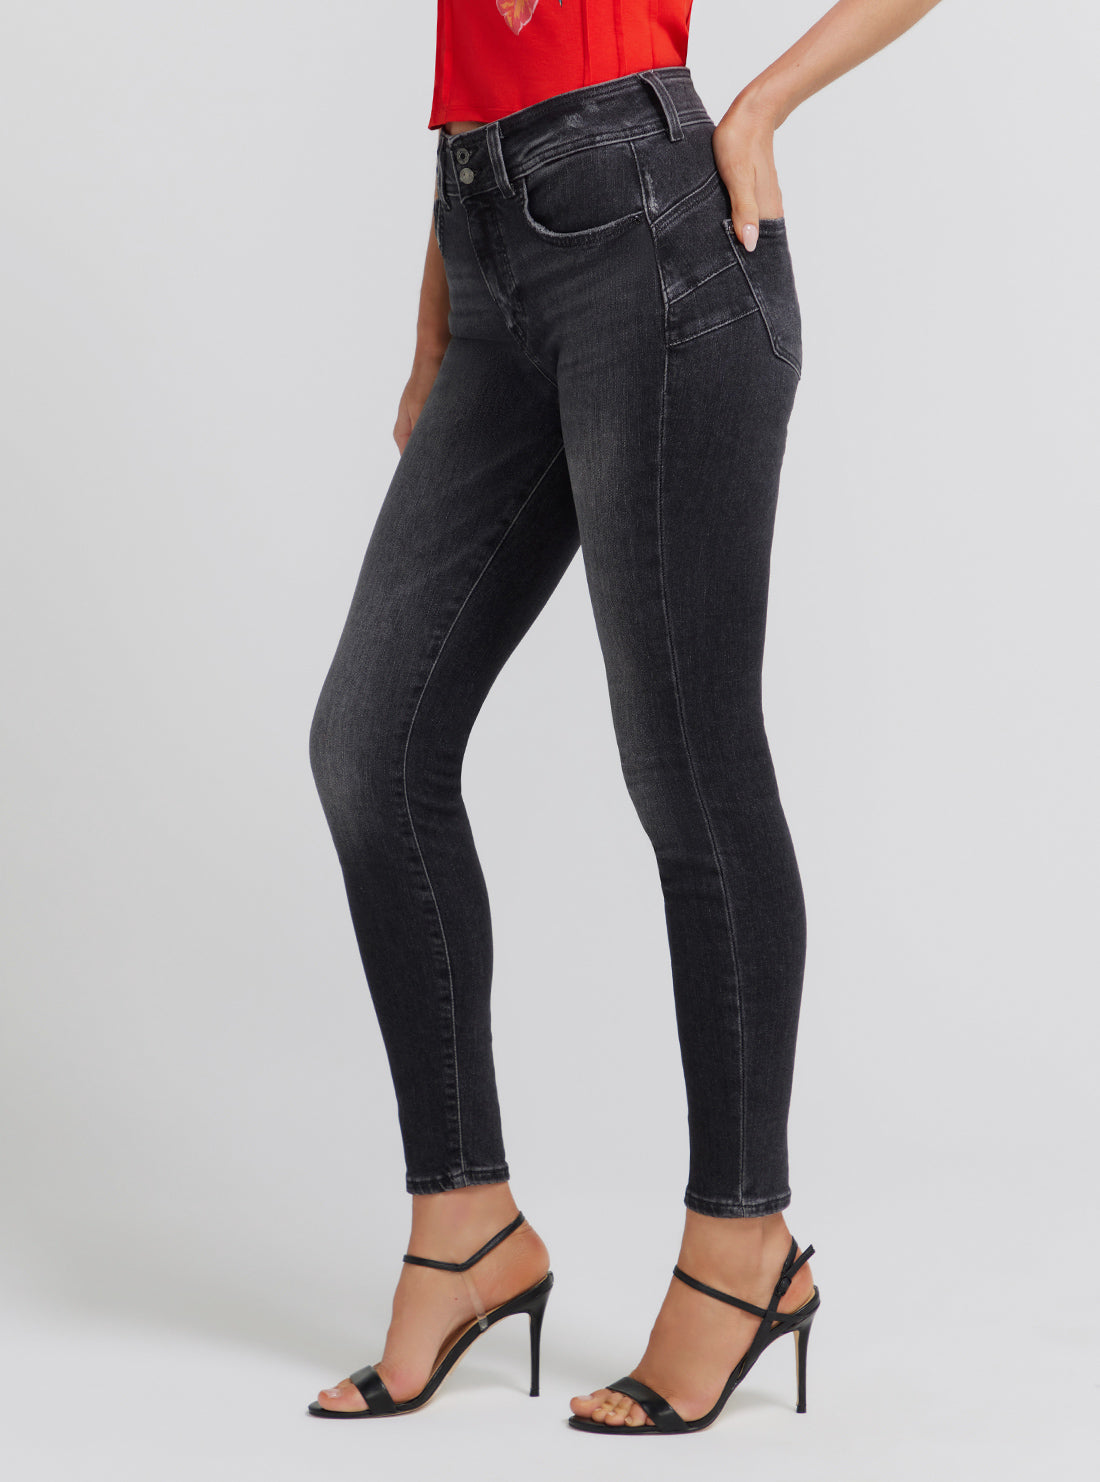 GUESS Women's Eco Mid-Rise Shape Up Denim Jeans In Station Black Wash W3YA35D52T2 Side View